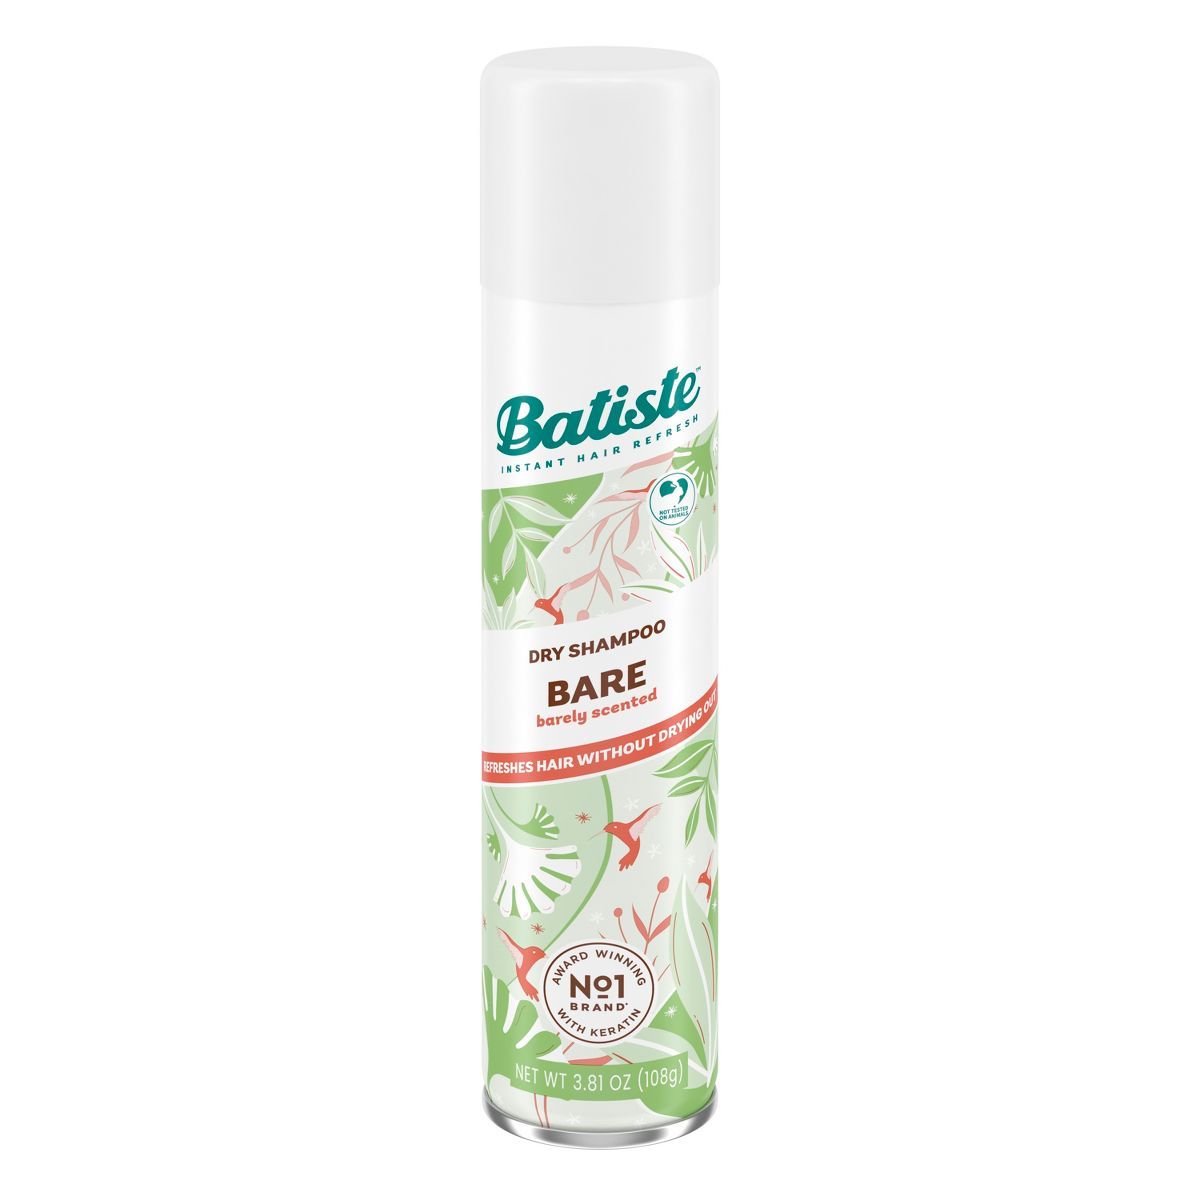 Batiste Bare Dry Shampoo Barely Scented | Target